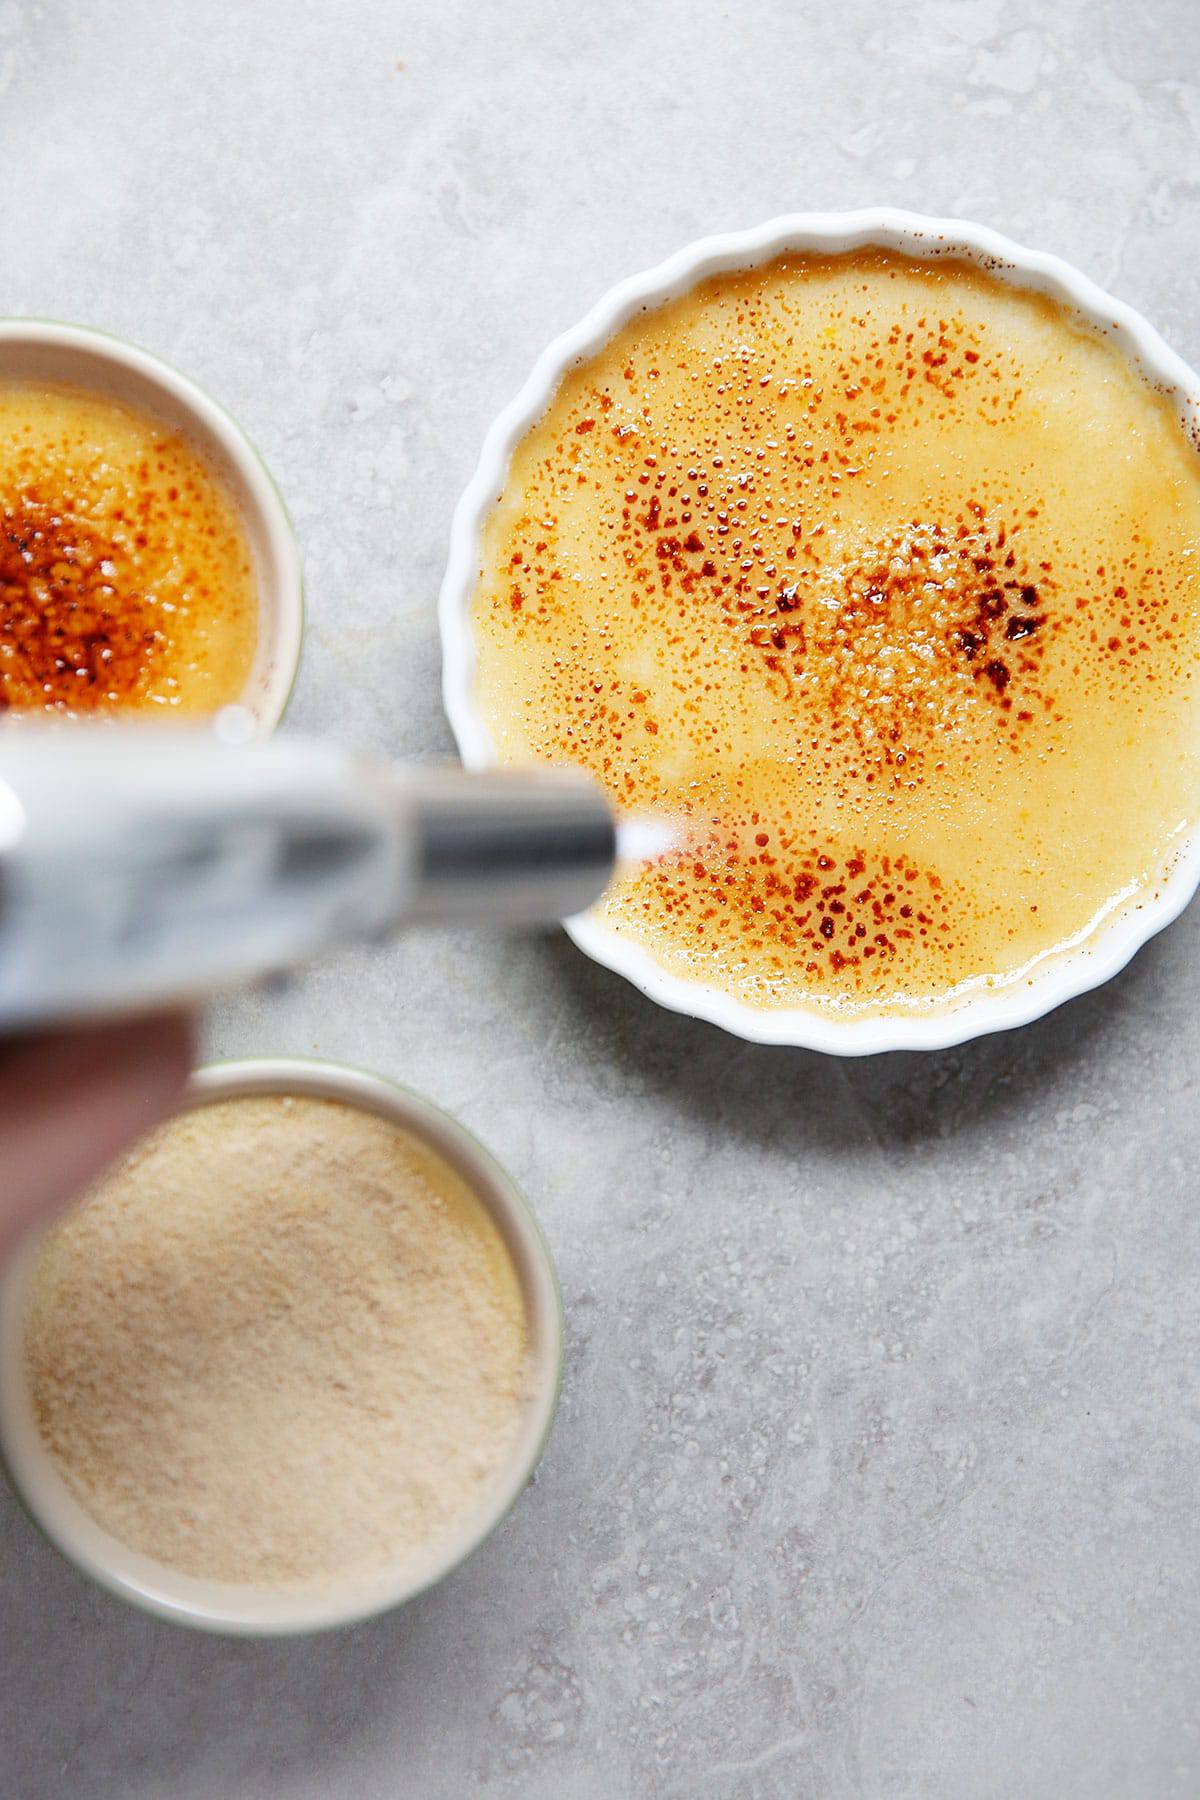 Does creme brulee have dairy in it